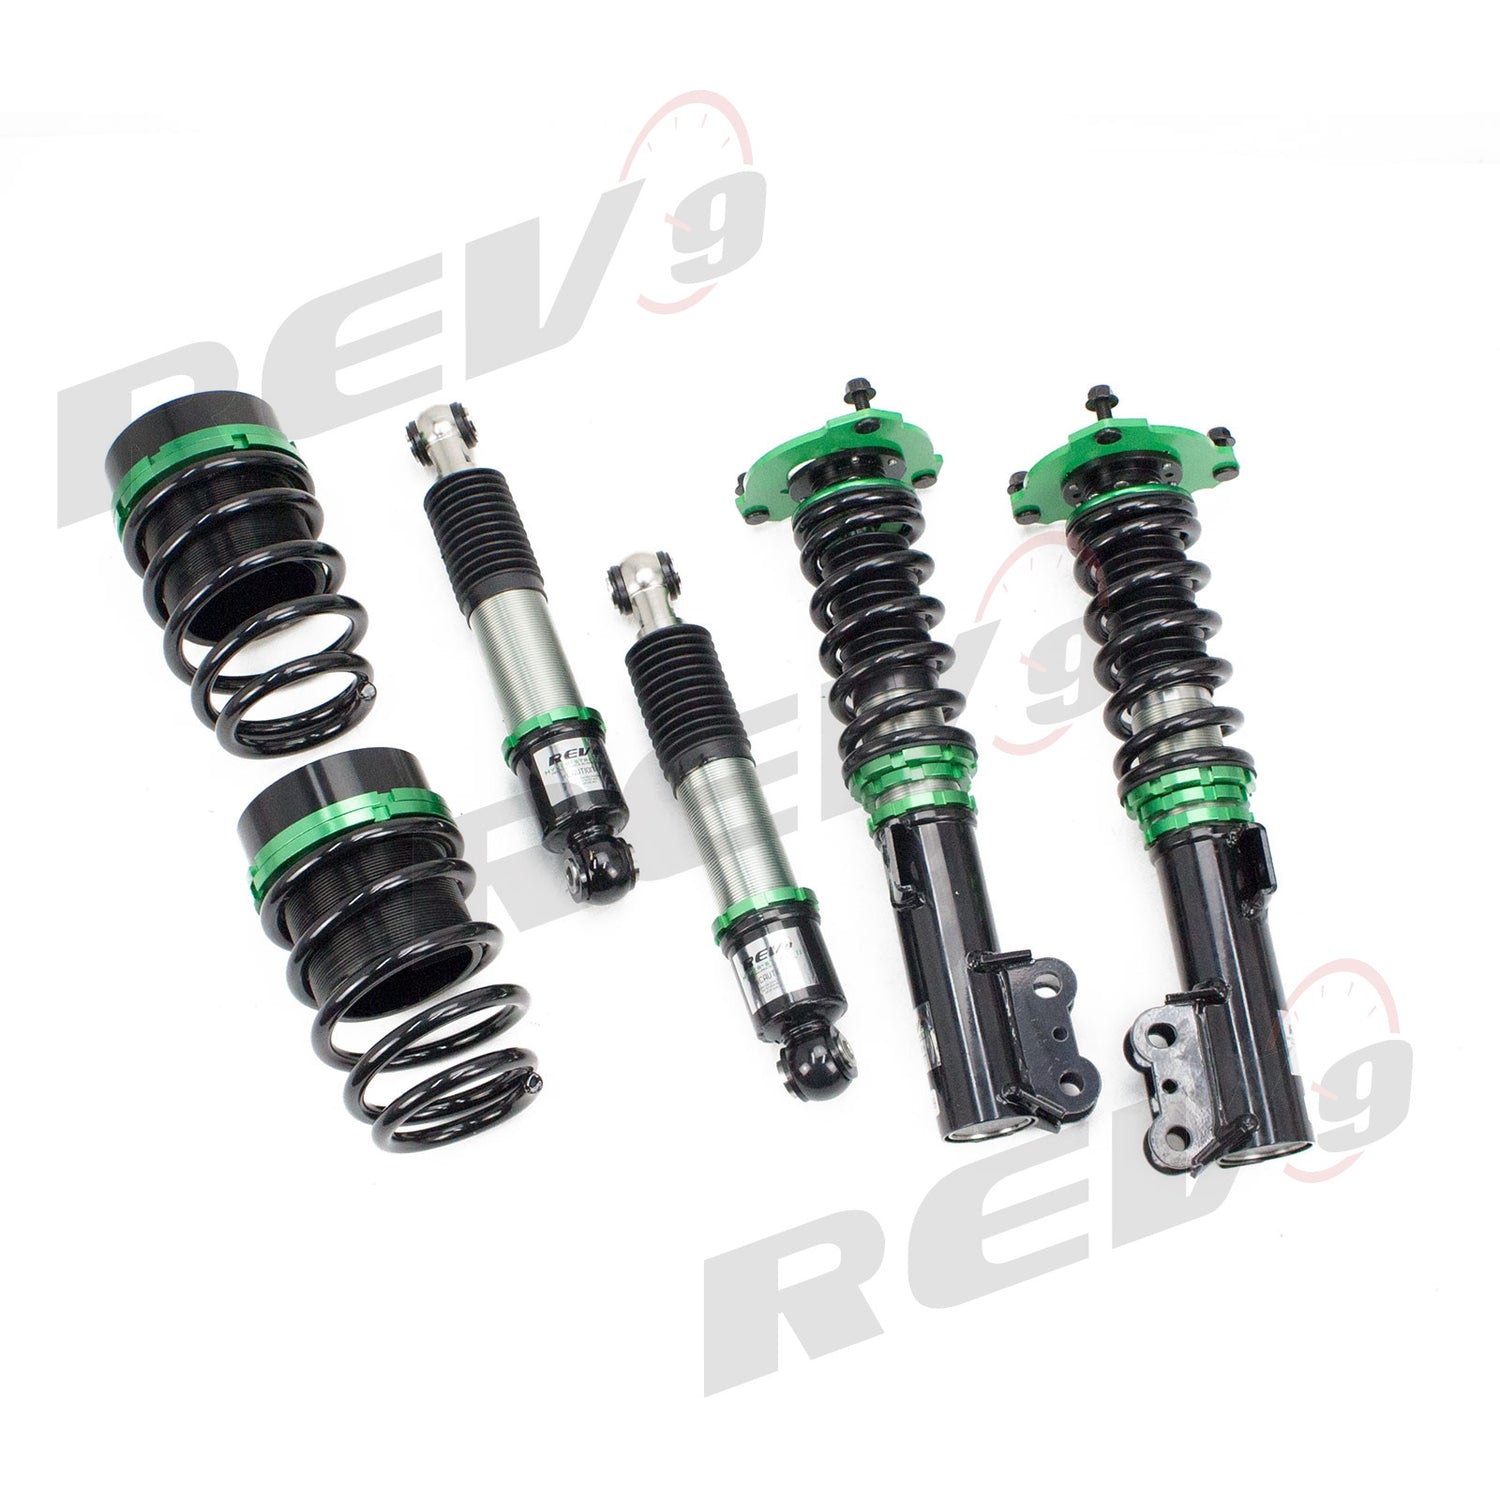 Rev9 Compatible With Hyundai Elantra Sedan (MD/UD) 2011-16 Hyper-Street II Coilover Kit w/ 32-Way Damping Force Adjustment